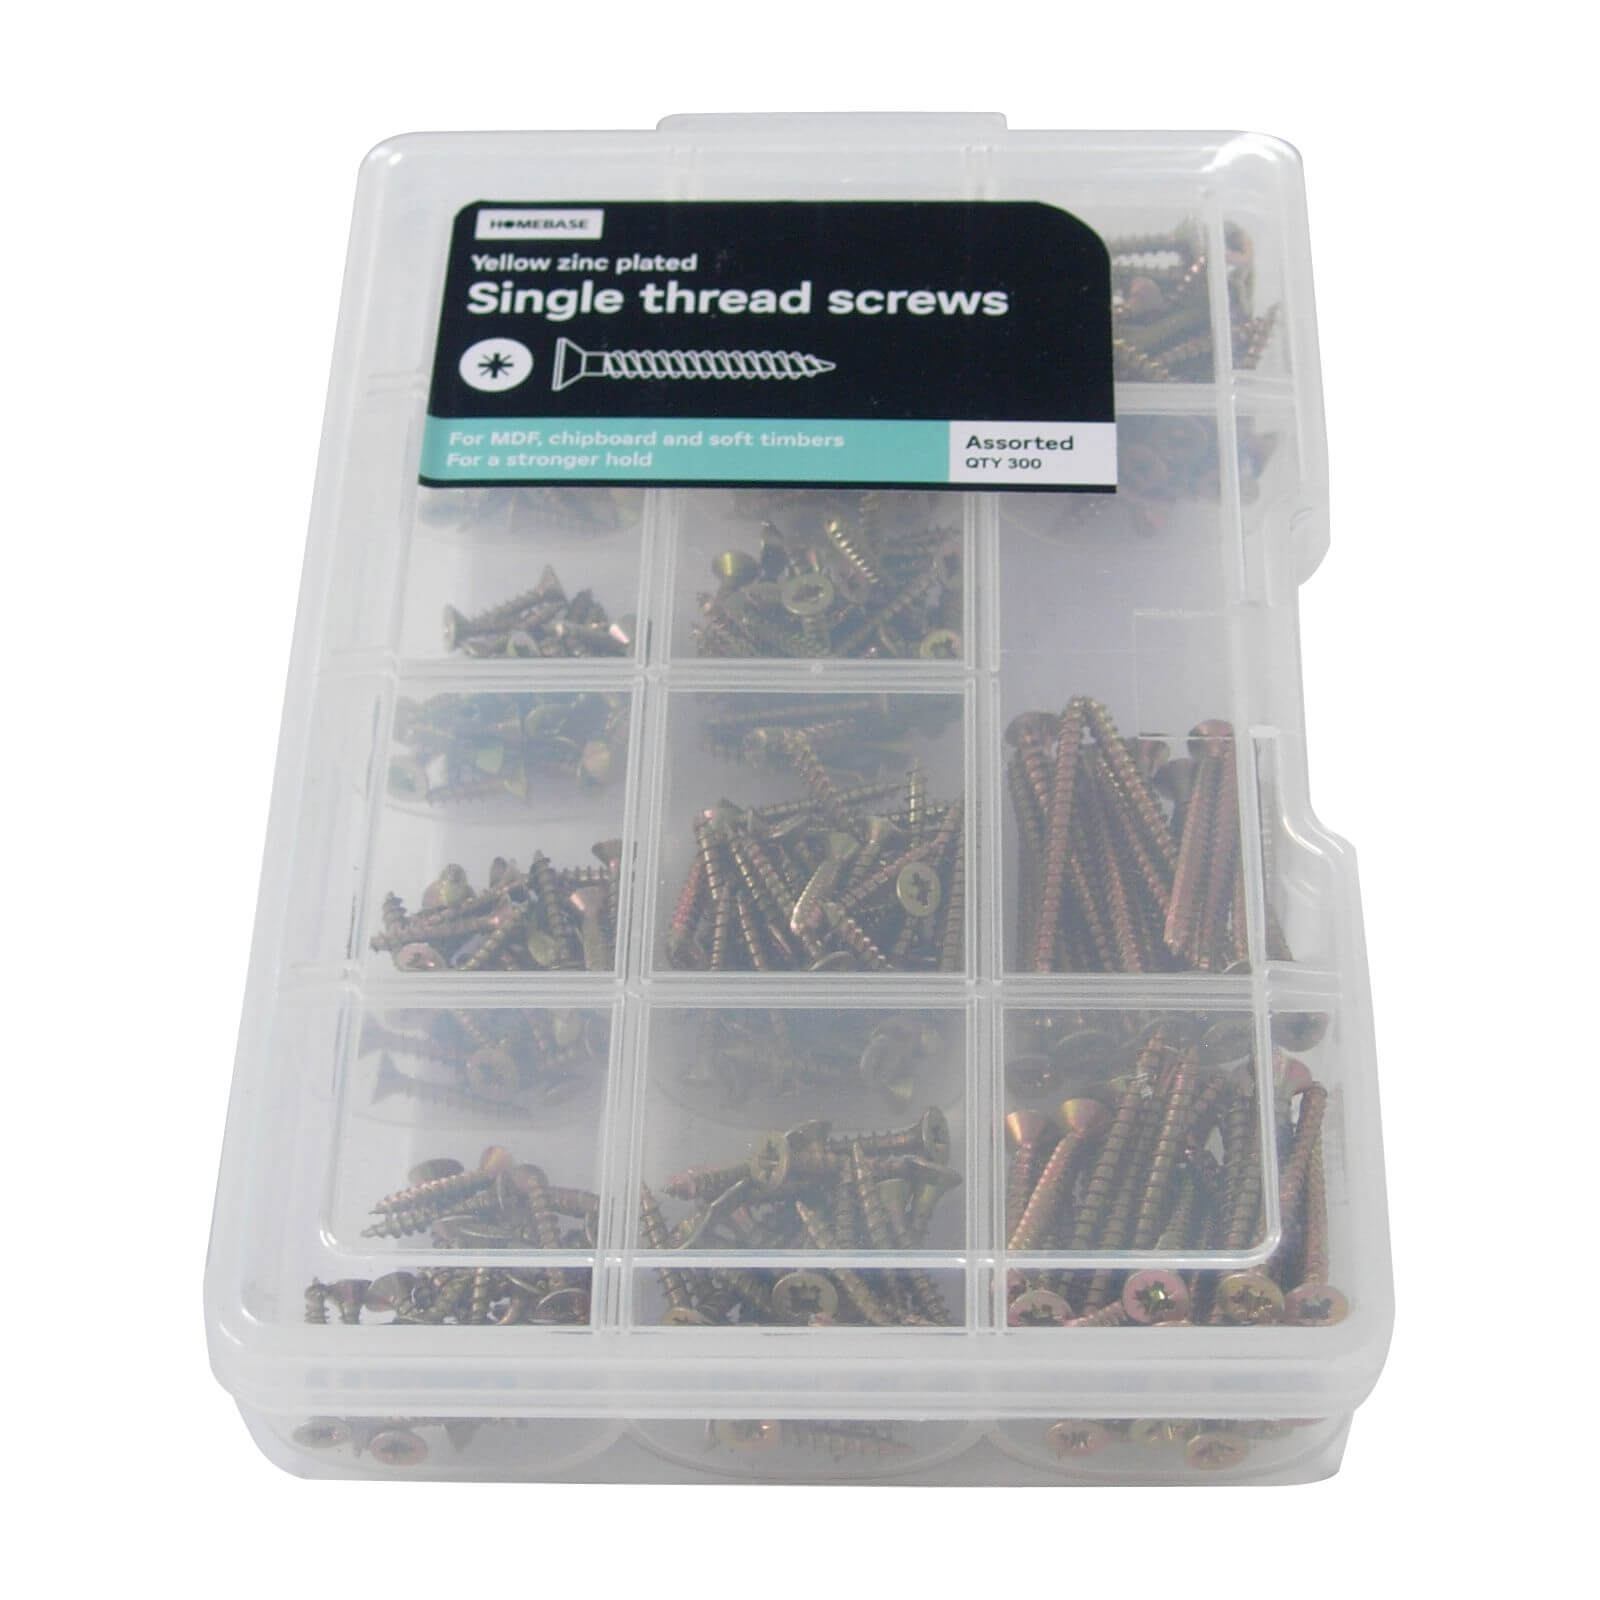 Single Thread Screw Kit - Yellow Zinc Plated - Assorted - 300 Pack